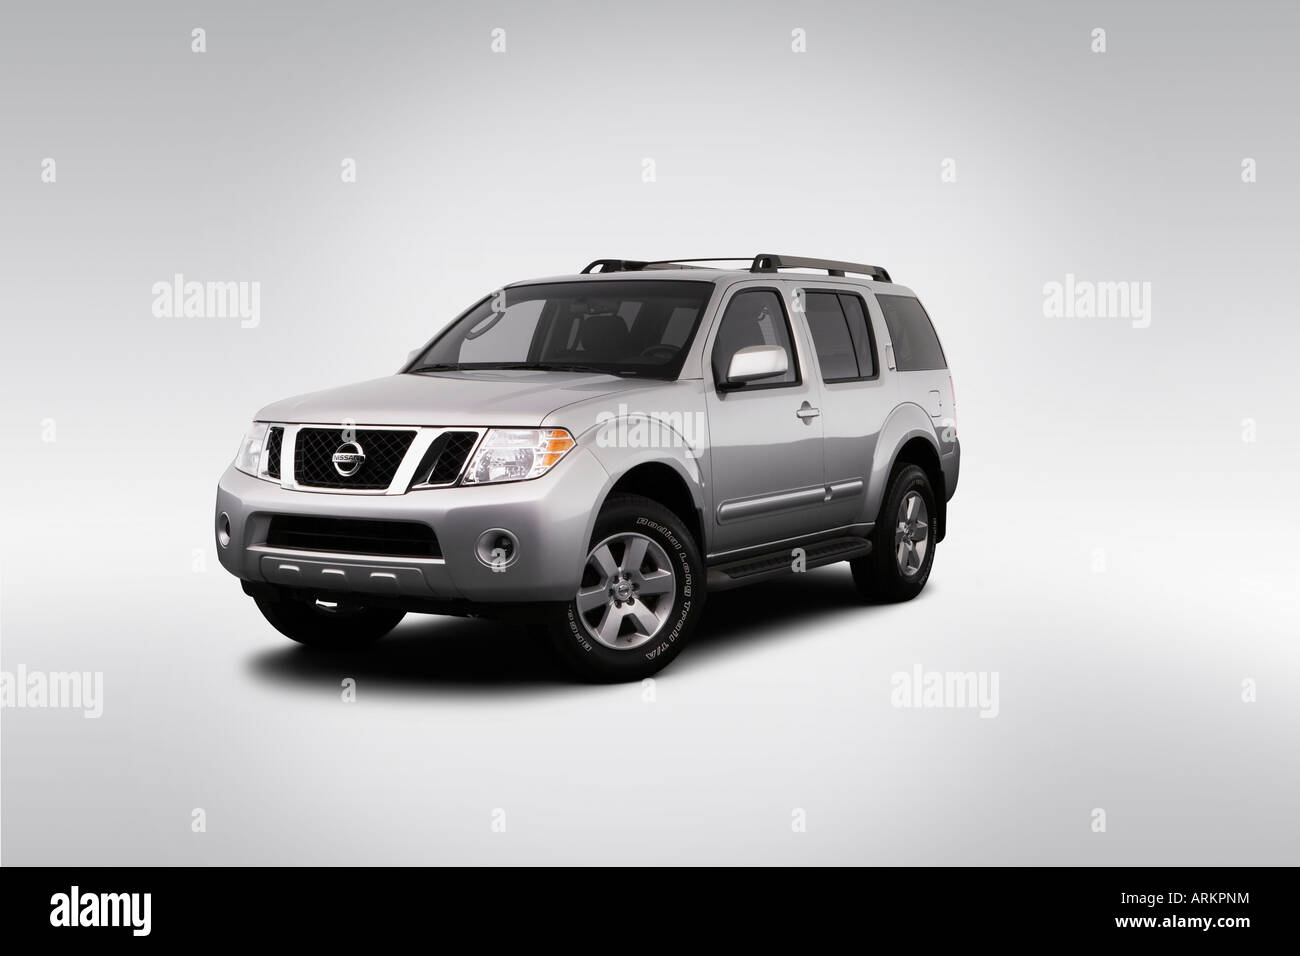 2008 Nissan Pathfinder SE in Silver - Front angle view Stock Photo